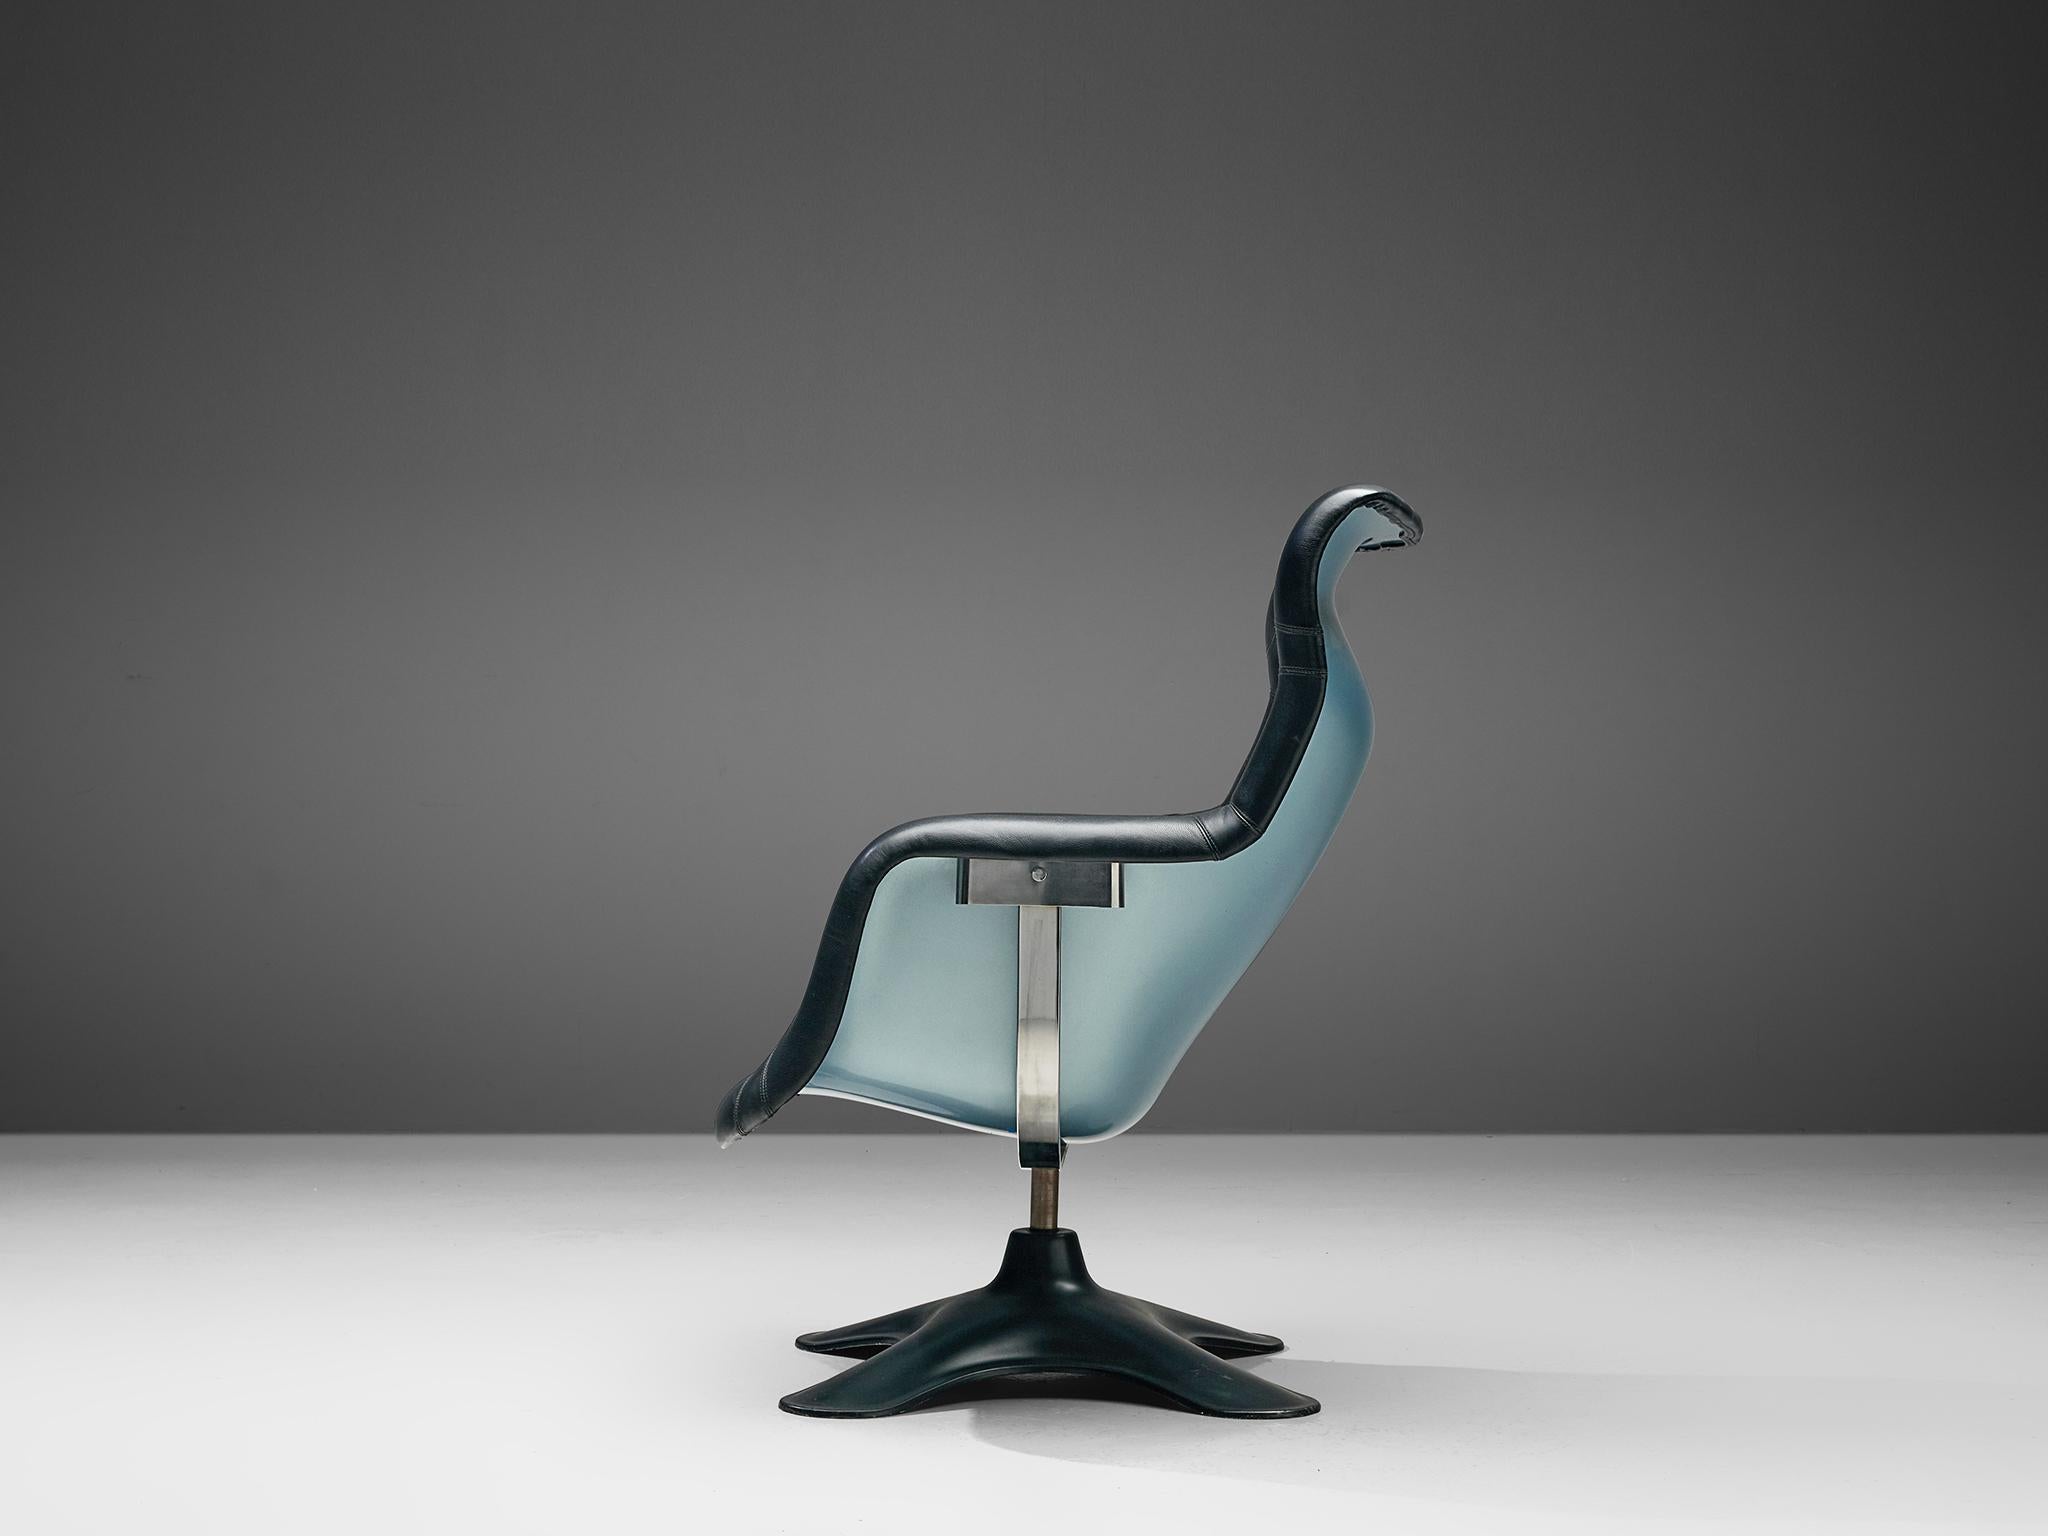 Yrjö Kukkapuro for Haimi, 'Karuselli' lounge chair, black leather, metallic blue and black fiberglass, Finland, 1960s.

Organic shaped lounge chair by Finnish designer Yrjö Kukkapuro. This chair consist of a moulded plastic shell with thick leather